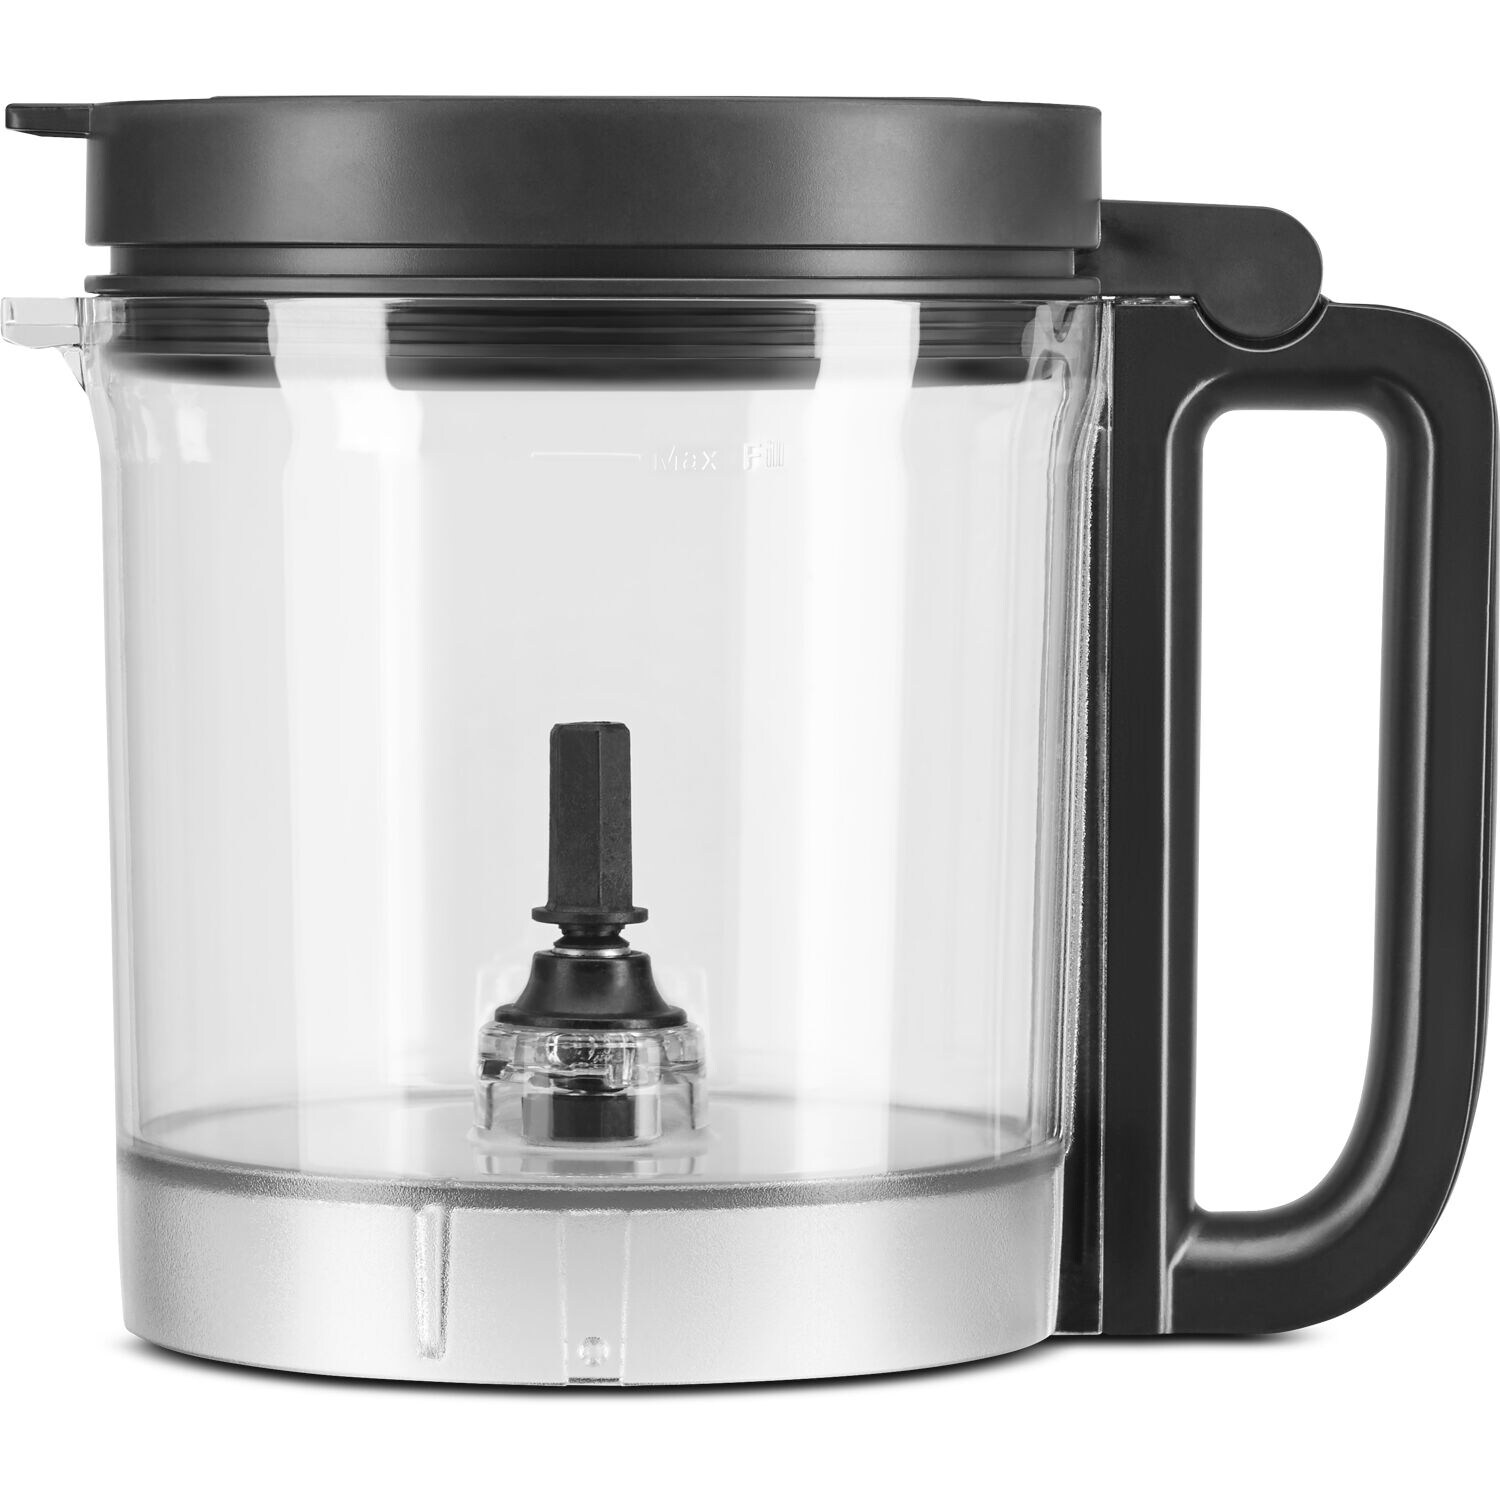 https://ak1.ostkcdn.com/images/products/is/images/direct/050274f44cf5cefe4af0384c0df7e0a1f722d615/KitchenAid-9-Cup-Food-Processor-in-Contour-Silver.jpg